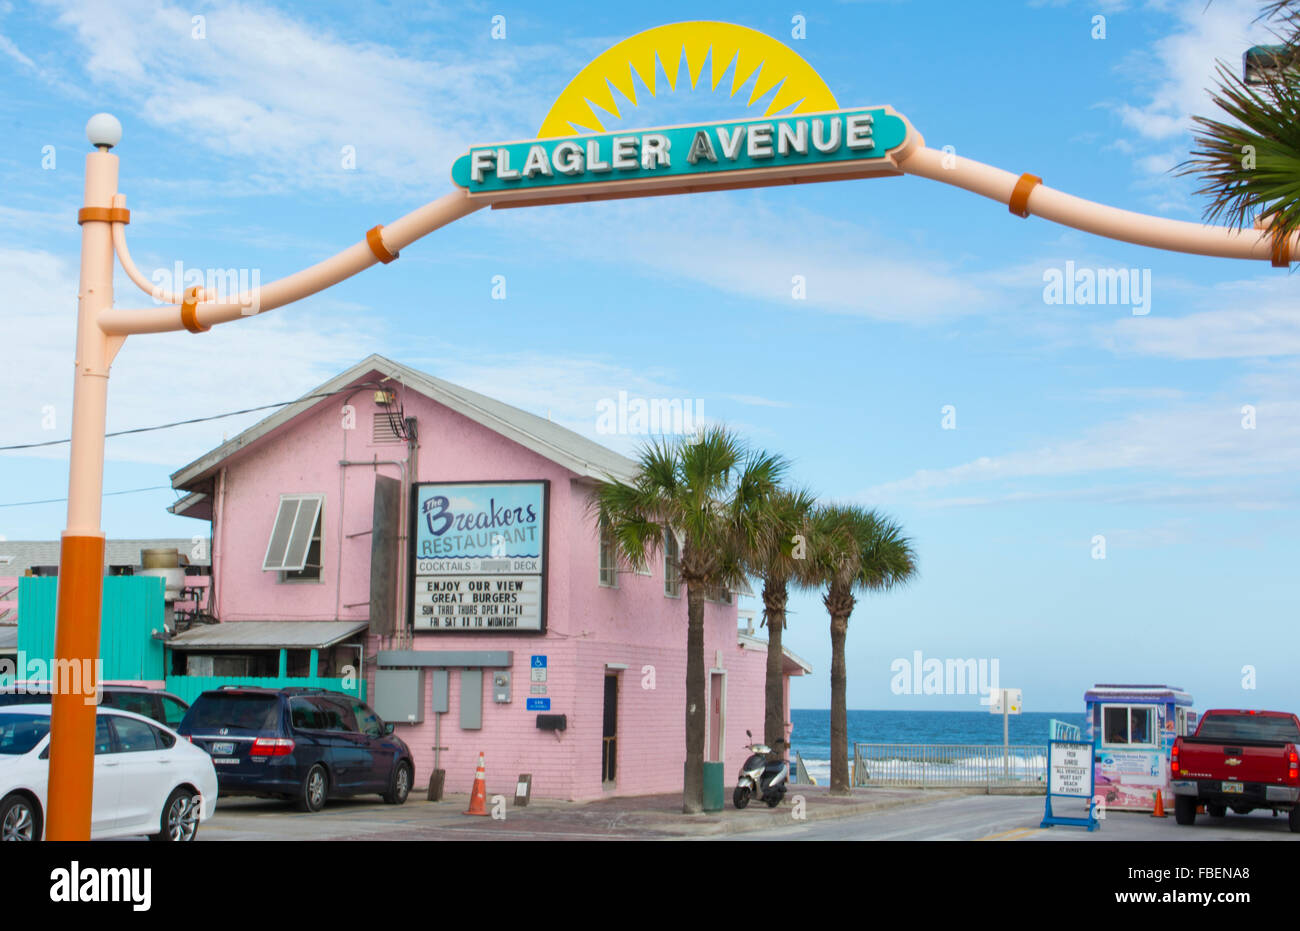 New Smyrna Beach Florida Famous Flagler Avenue Entrance To Drive On Beach With Breakers Restaurant In Pink Stock Photo Alamy